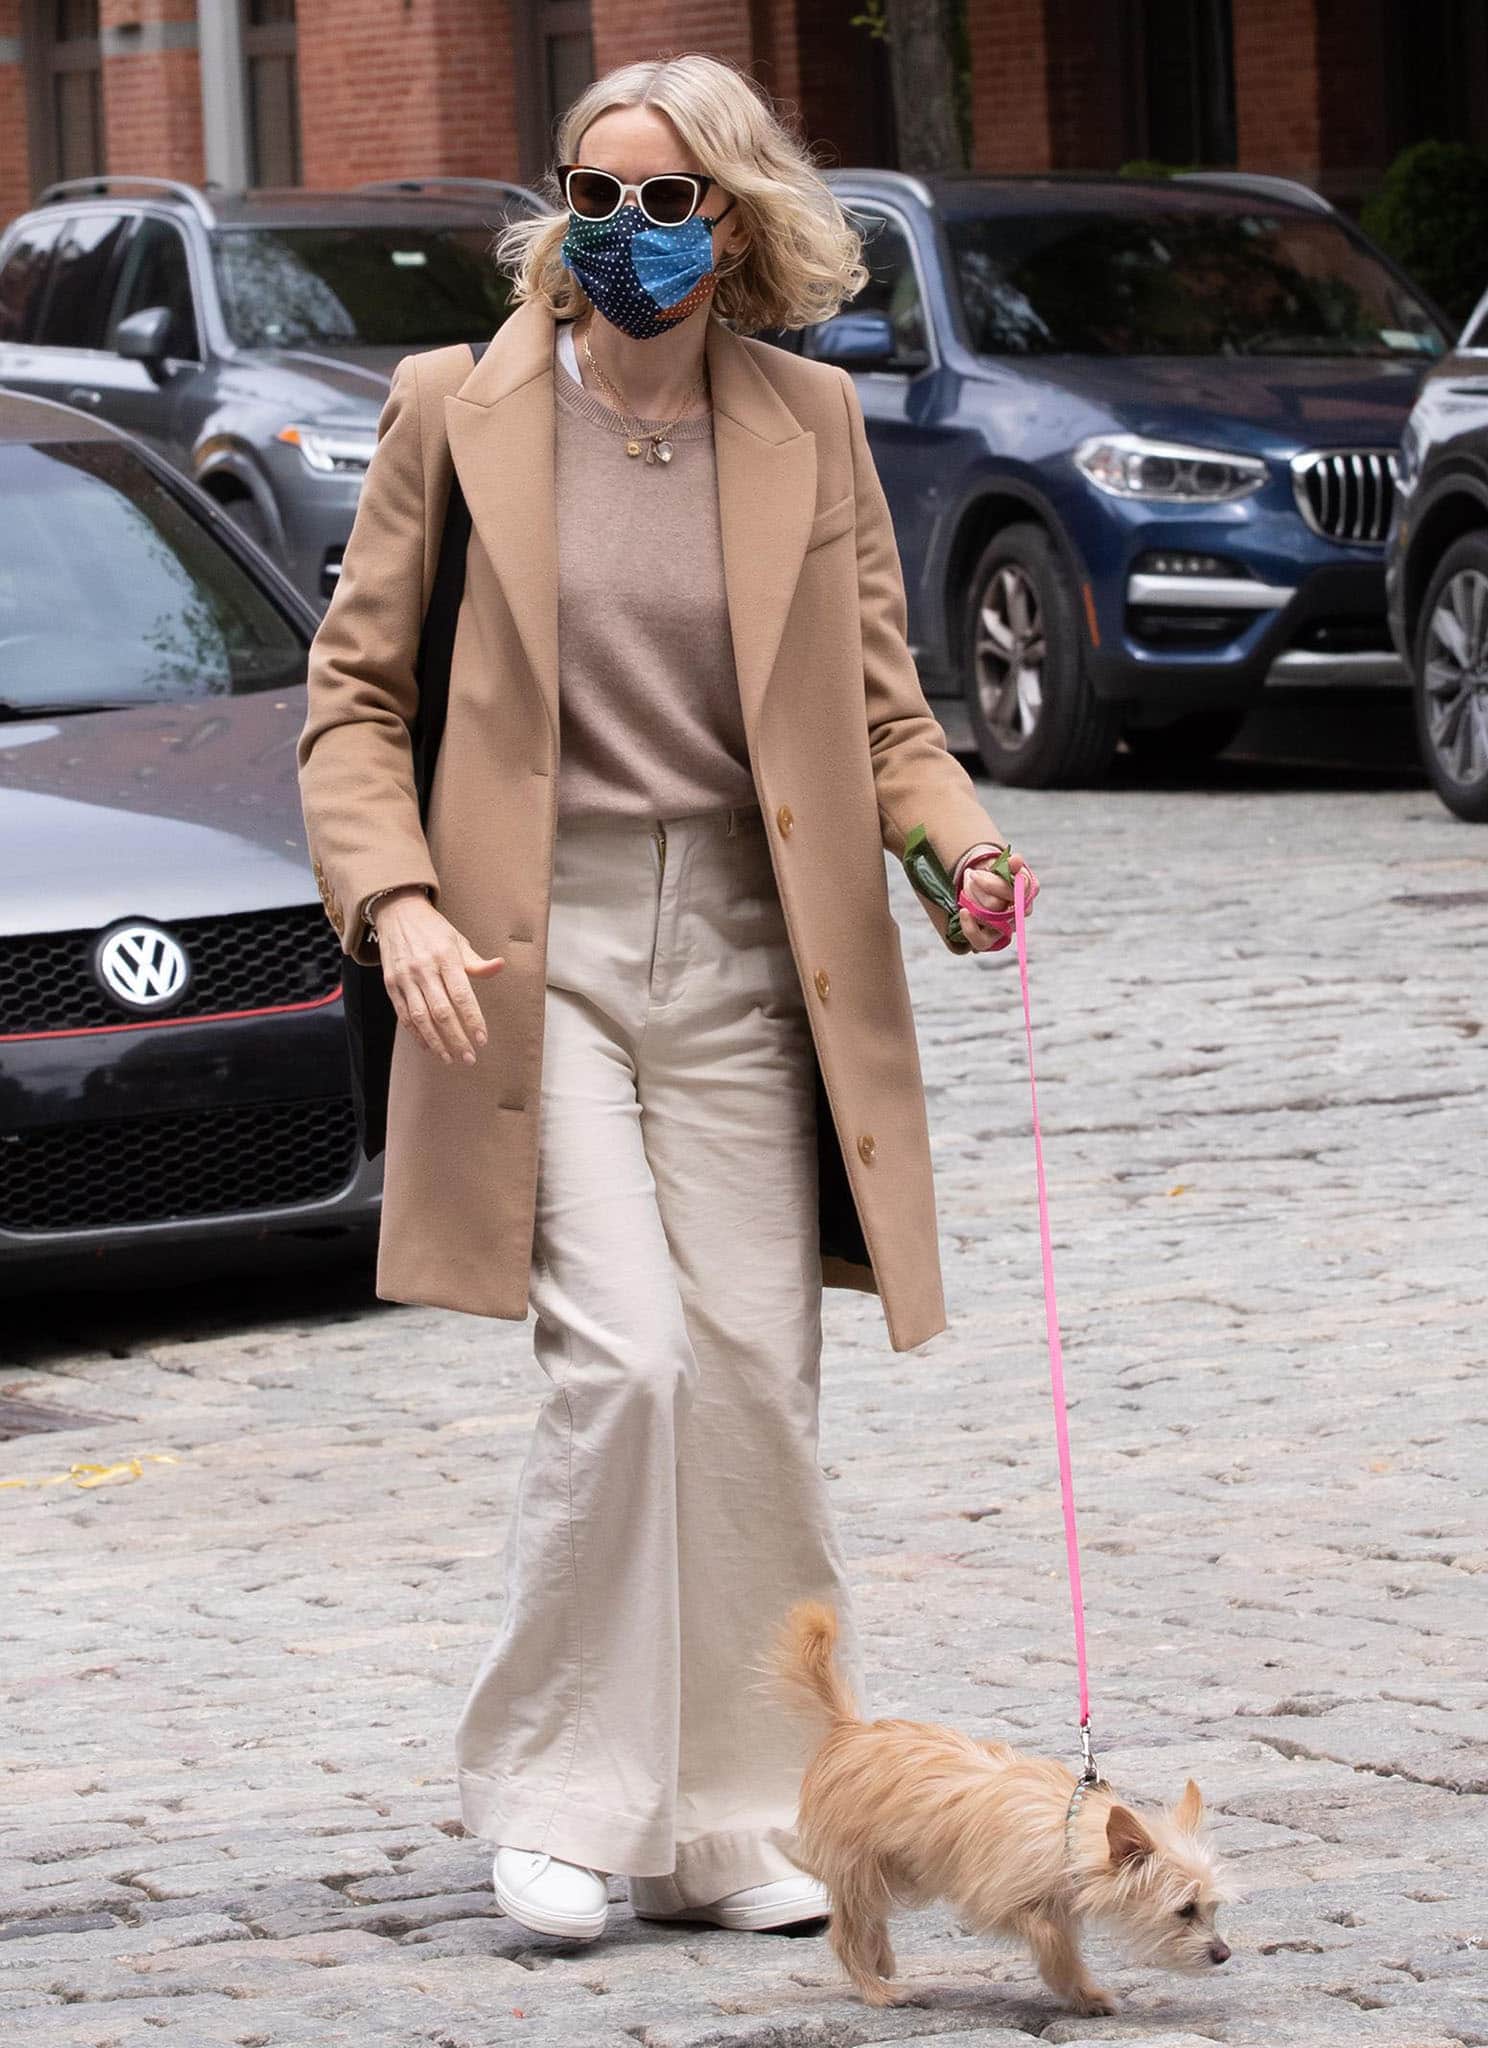 Naomi Watts opts for a neutral-colored outfit with a camel coat, a beige sweater, and cream pants